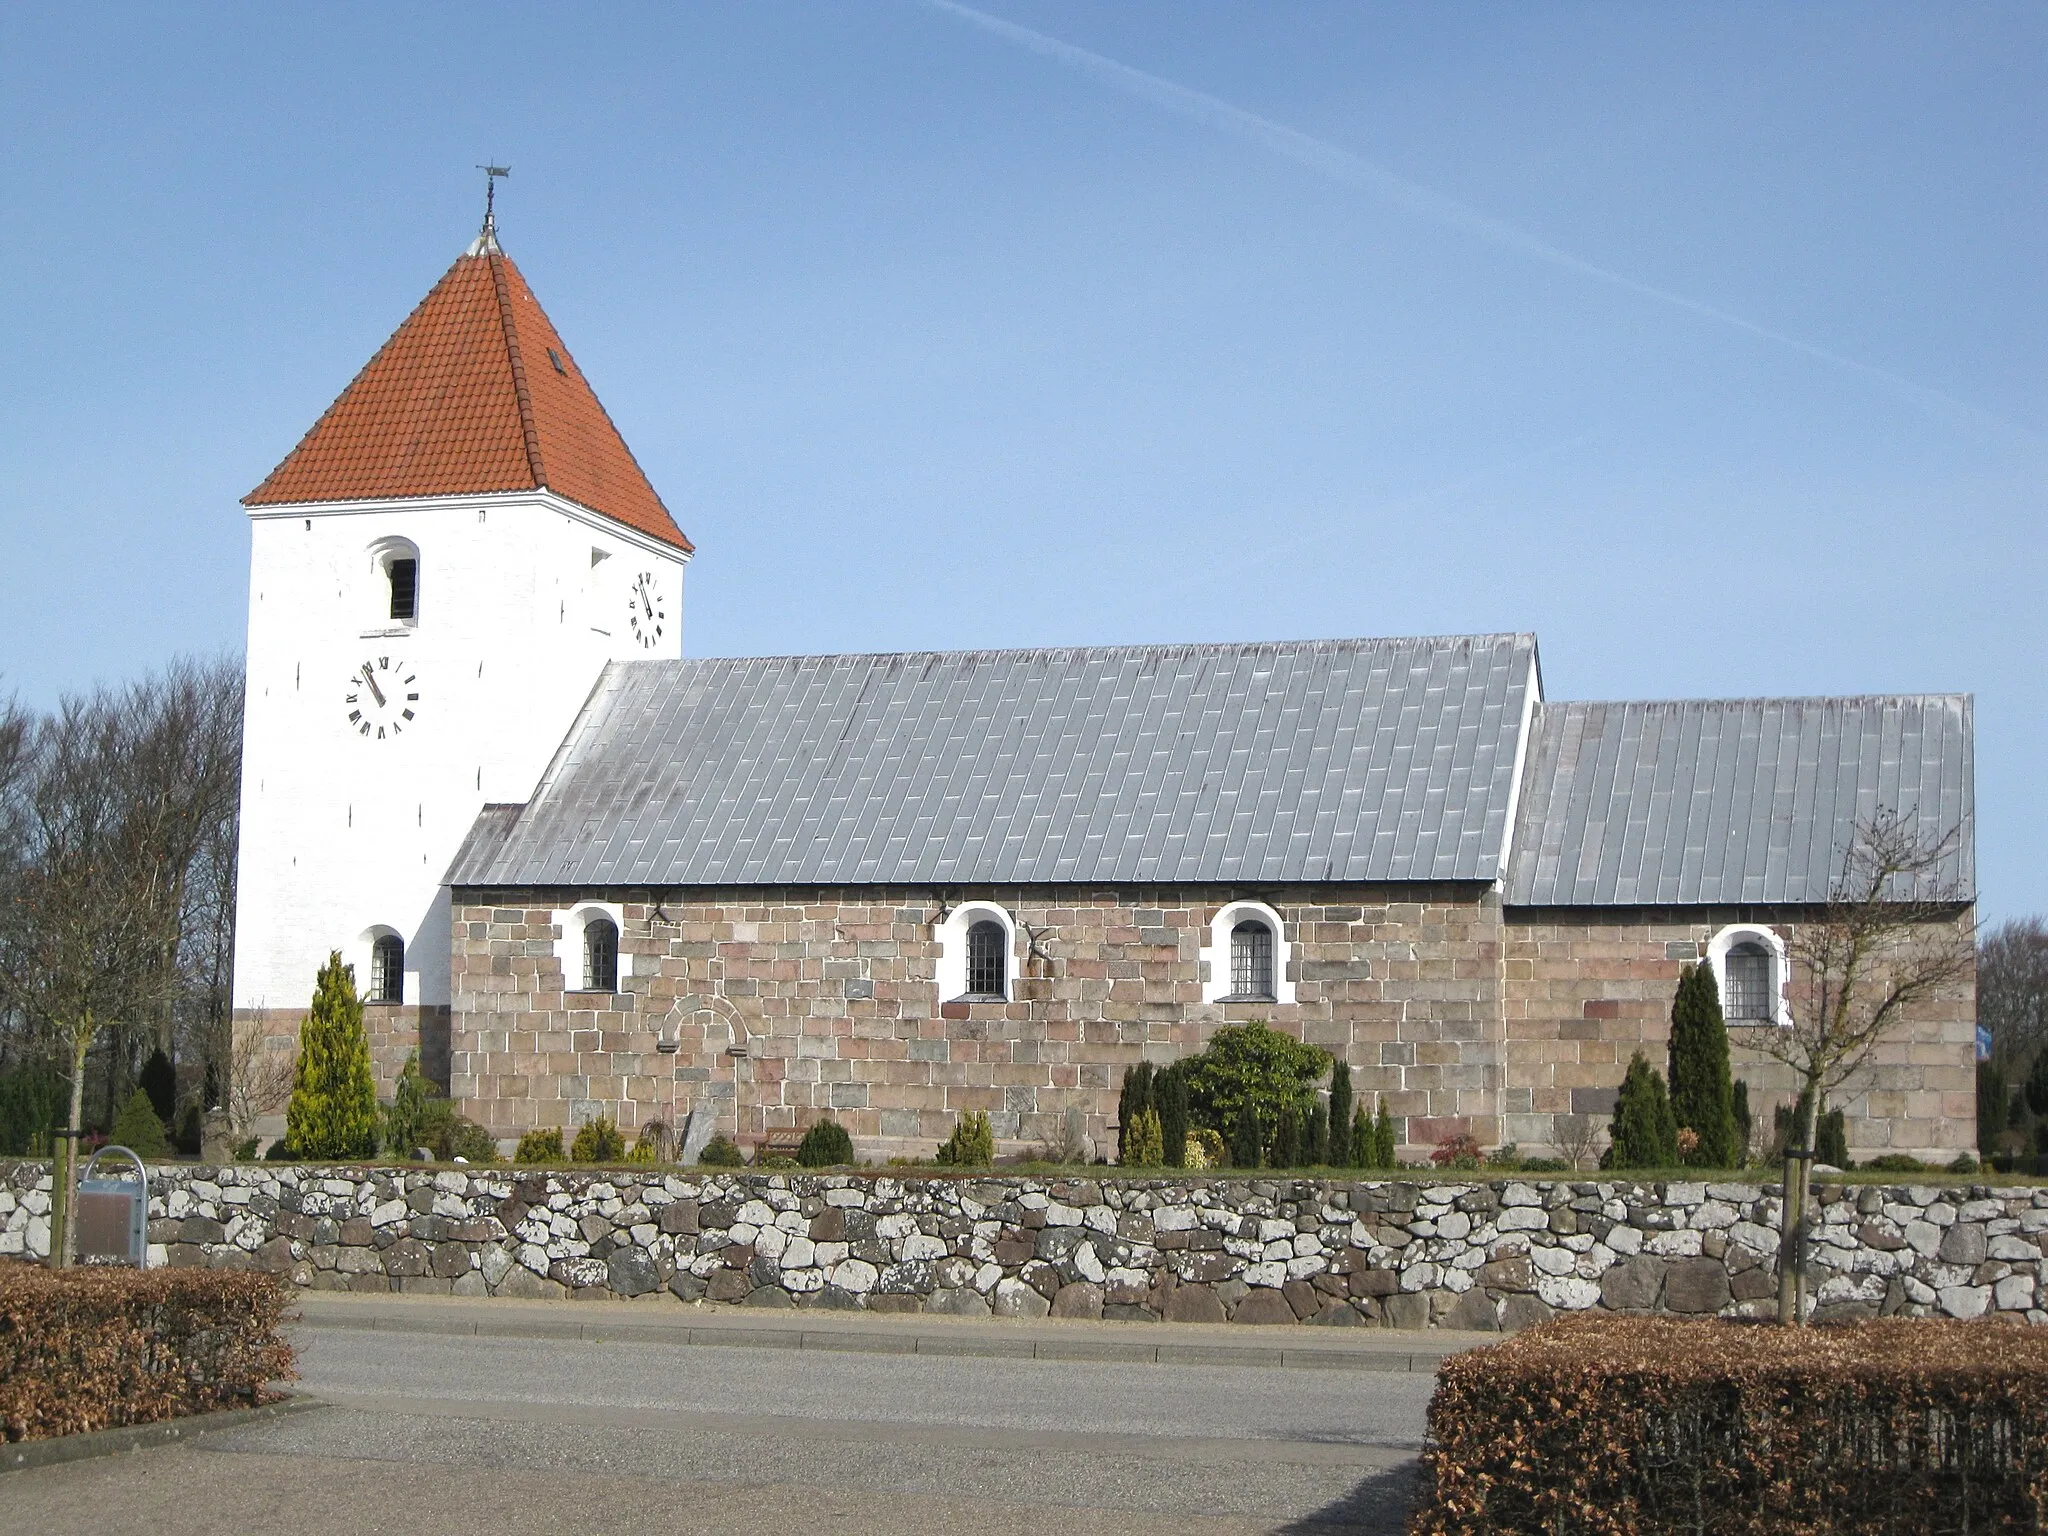 Photo showing: The church "Farsø Kirke" in the small town "Farsø". The town is located in North Jutland, Denmark.